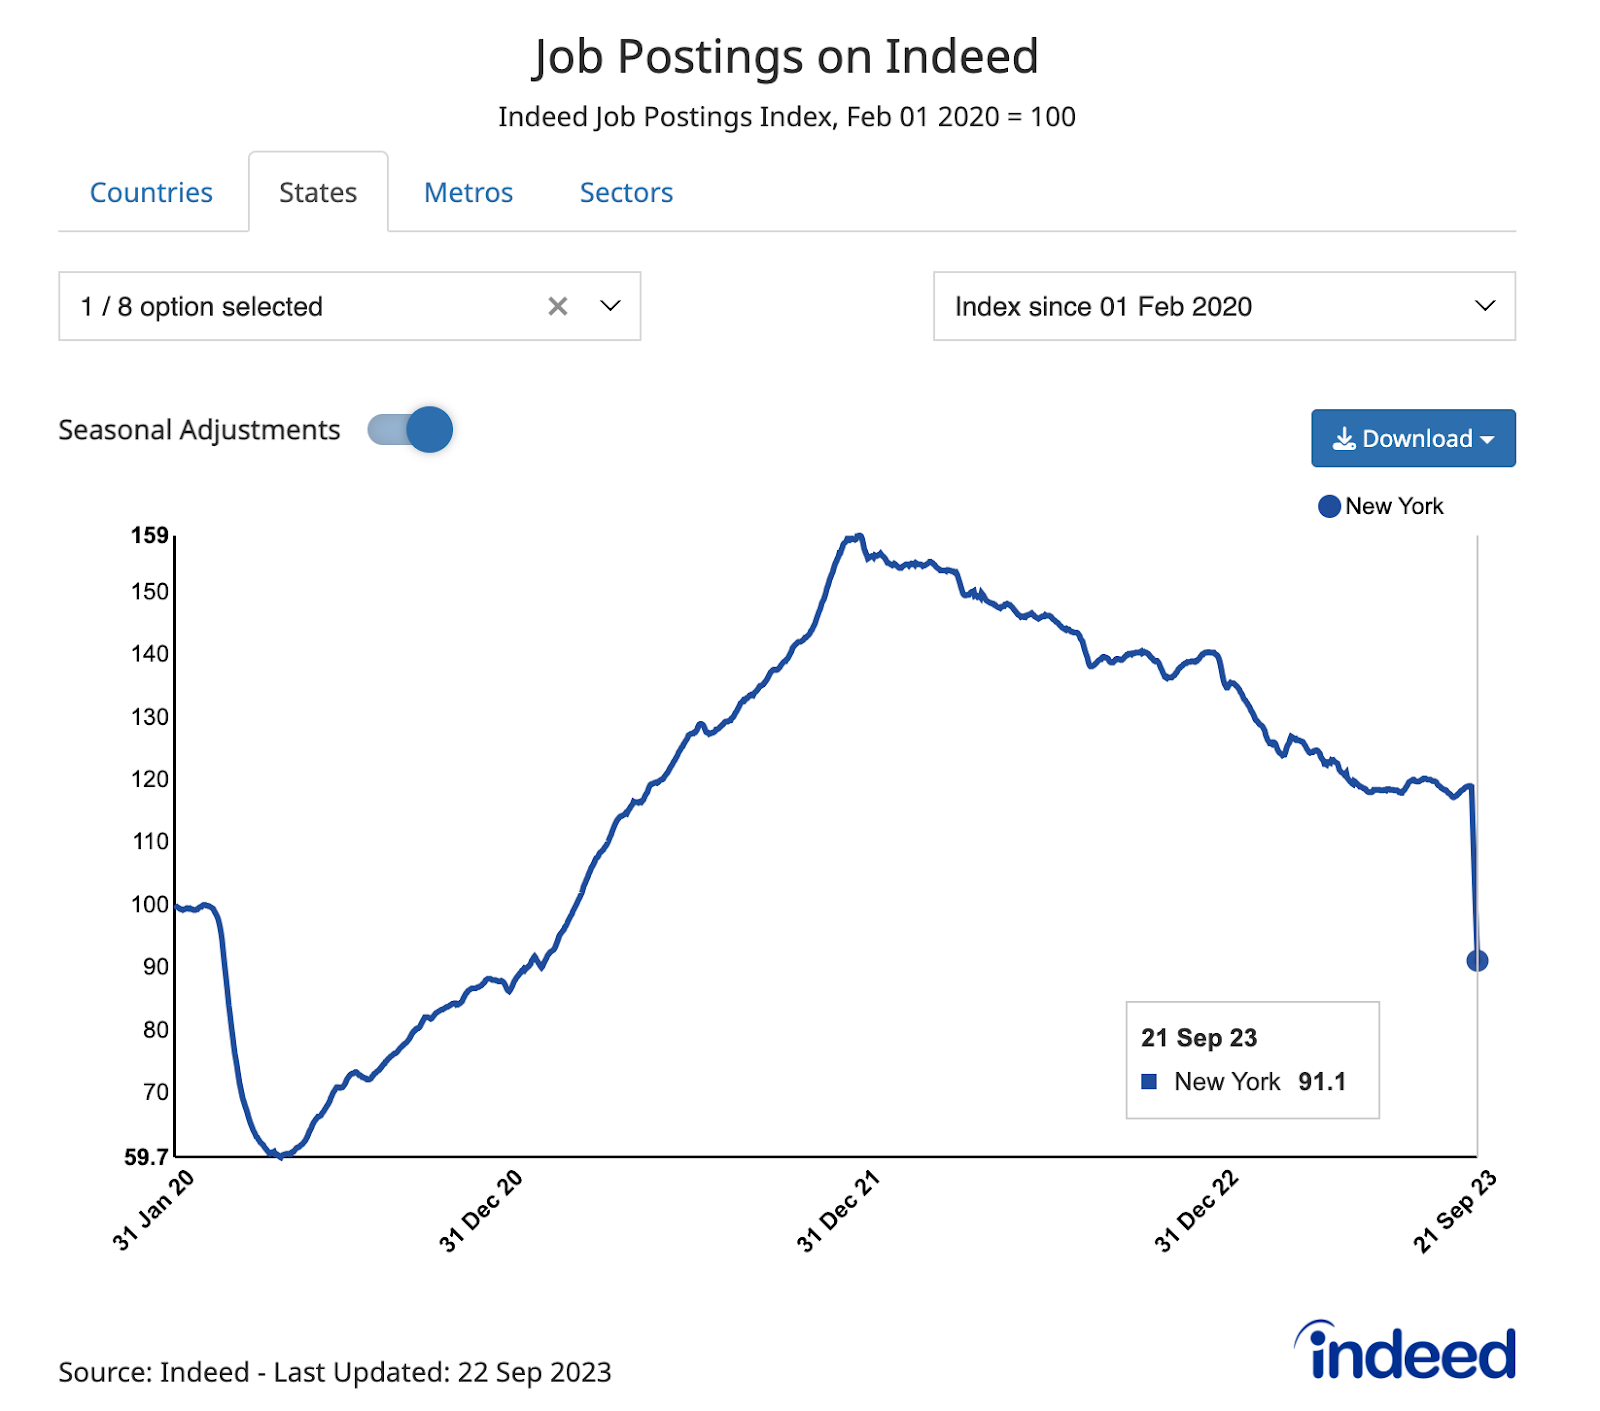 Number of New York job postings on Indeed